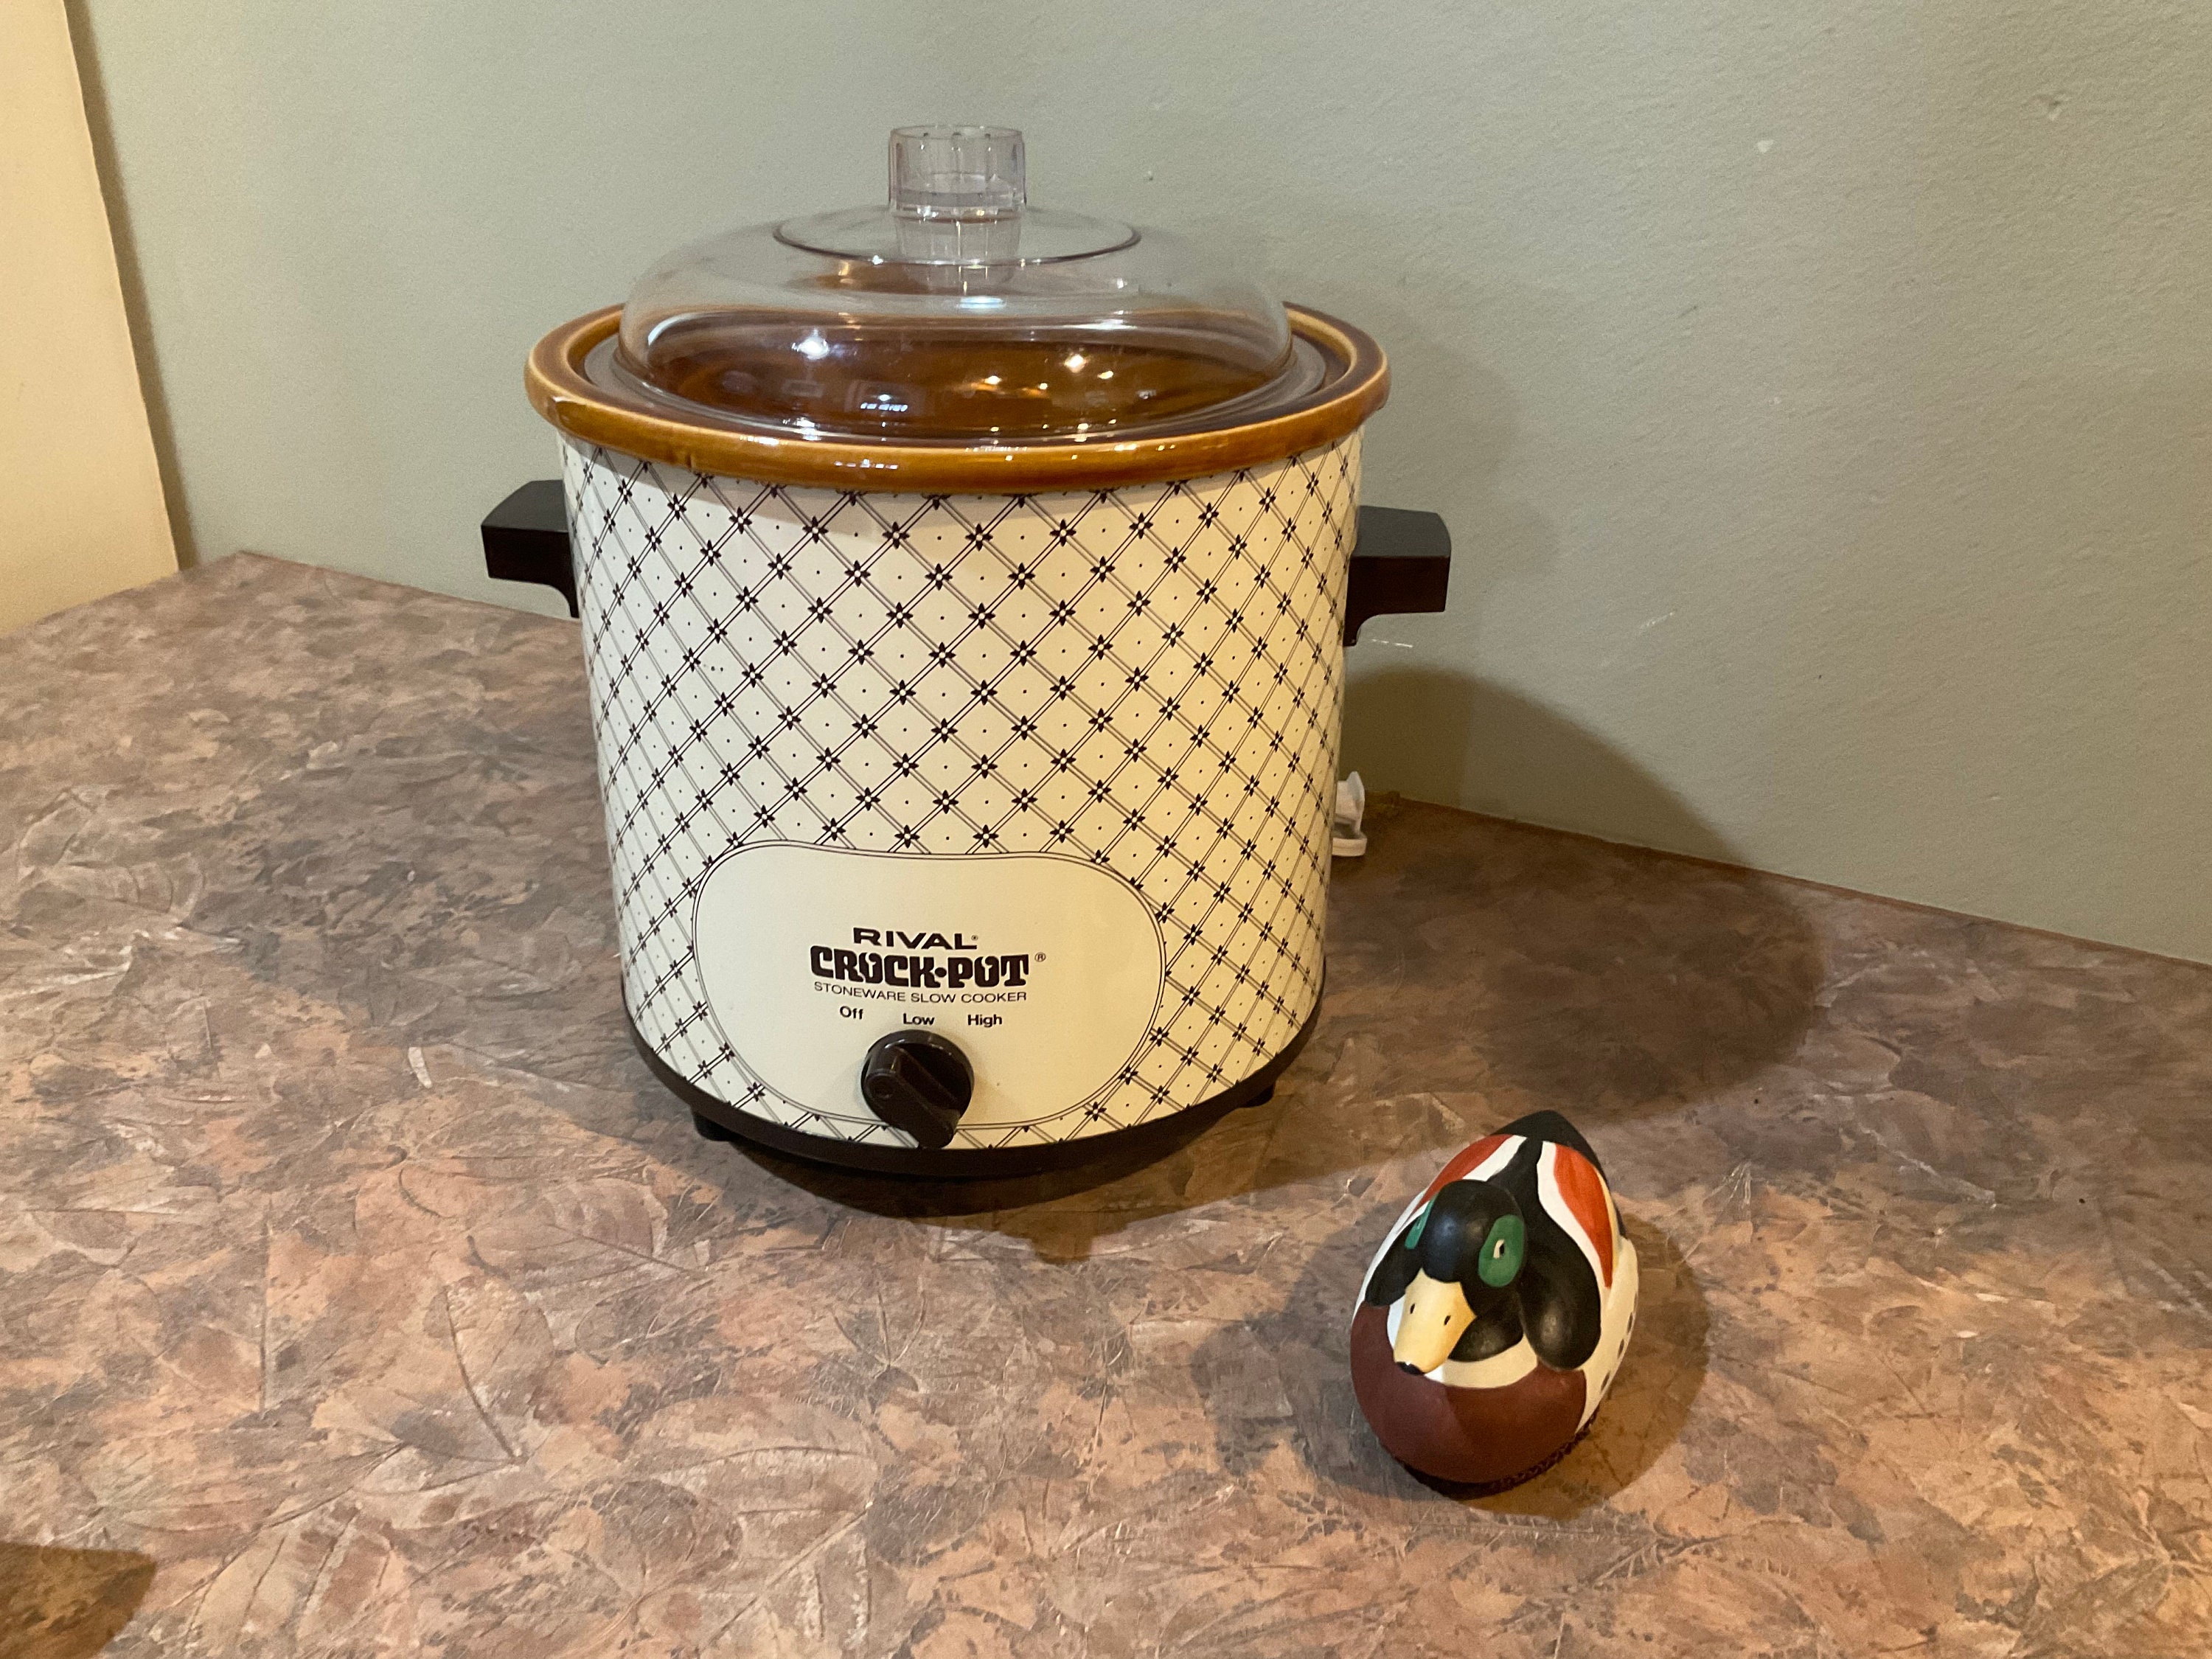 Rival Crock Pot Corning Ware Slow Cooker With Removable 3 QT